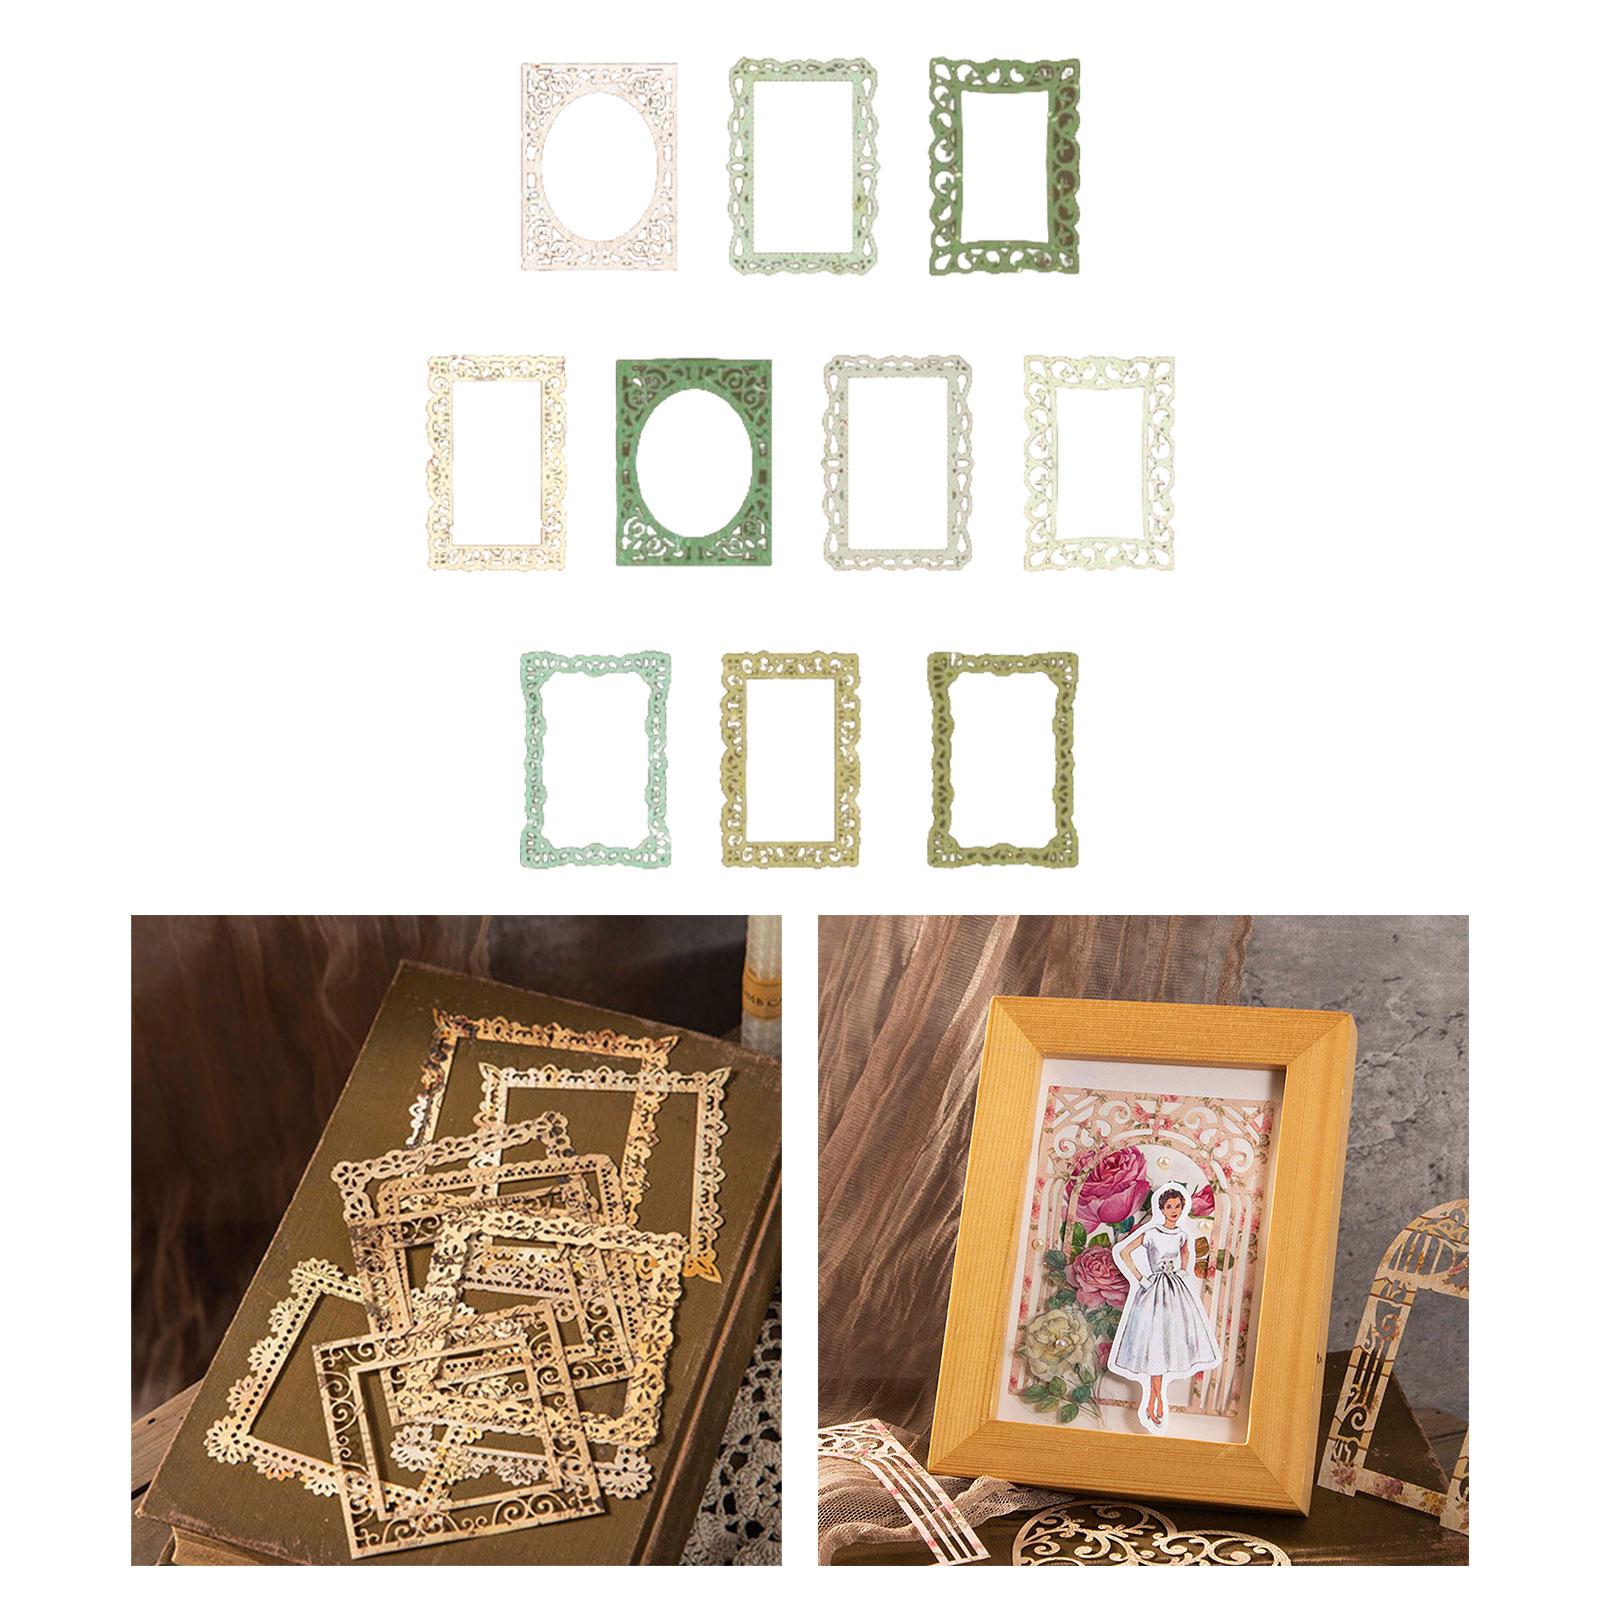 Decor Frame Scrapbooking Paper Craft Supplies for Card Making Planner Diary Rectangle